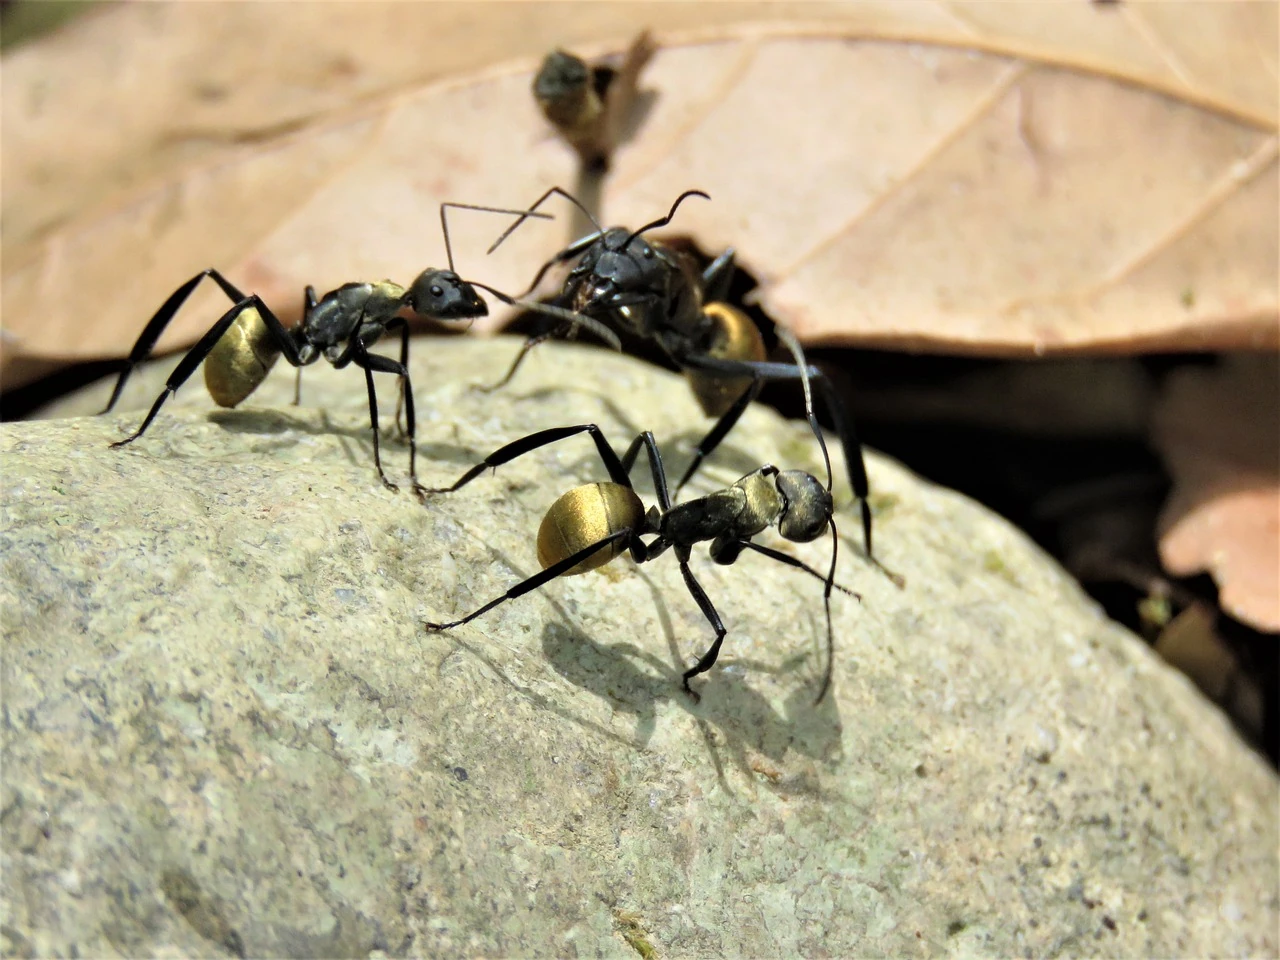 Spiny Ants: Tricksters That Play Dead